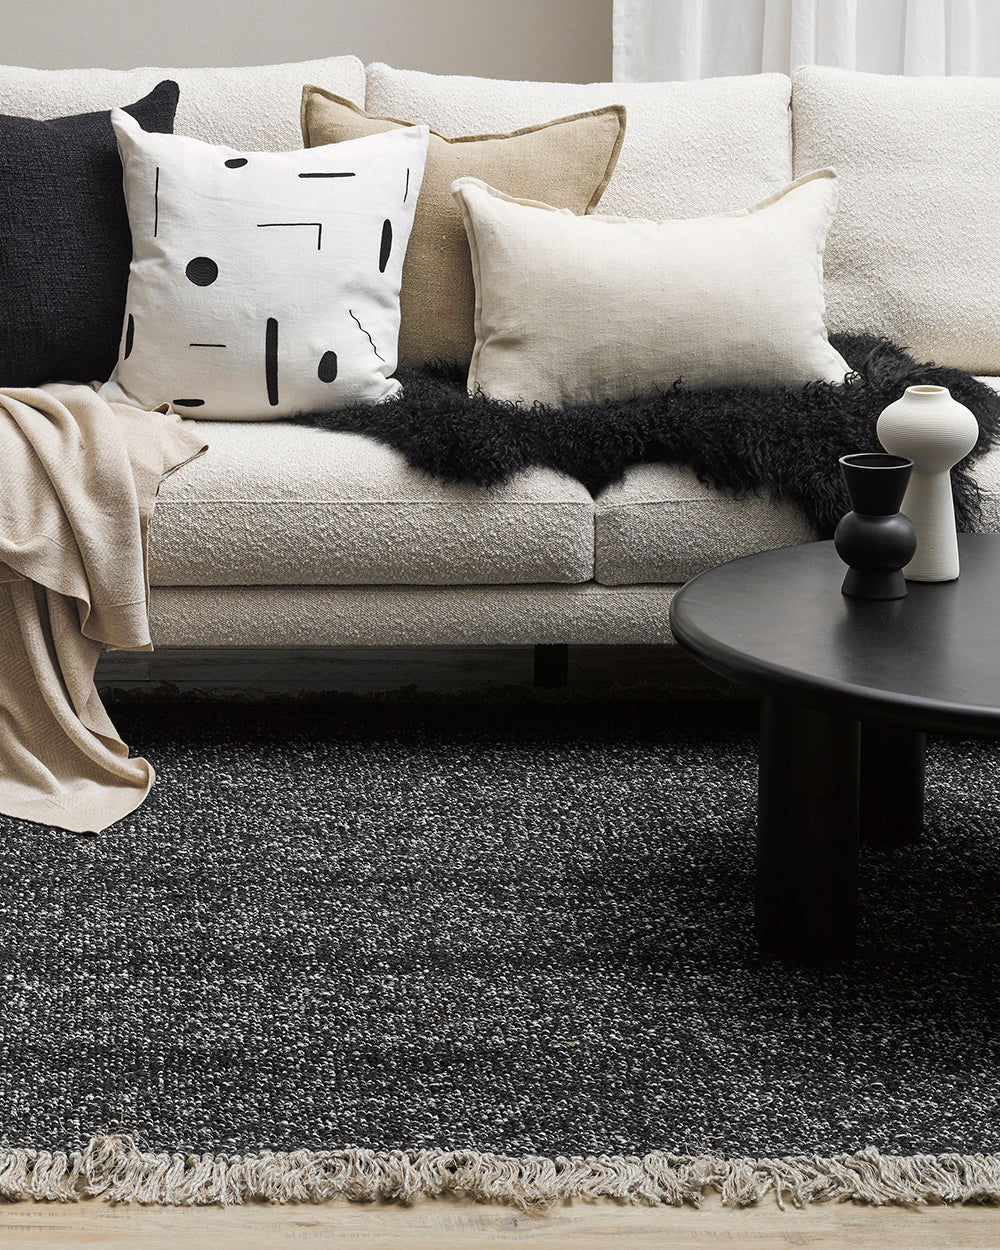 Ulster Black Natural Rug from Baya Furtex Stockist Make Your House A Home, Furniture Store Bendigo. Free Australia Wide Delivery. Mulberi Rugs.